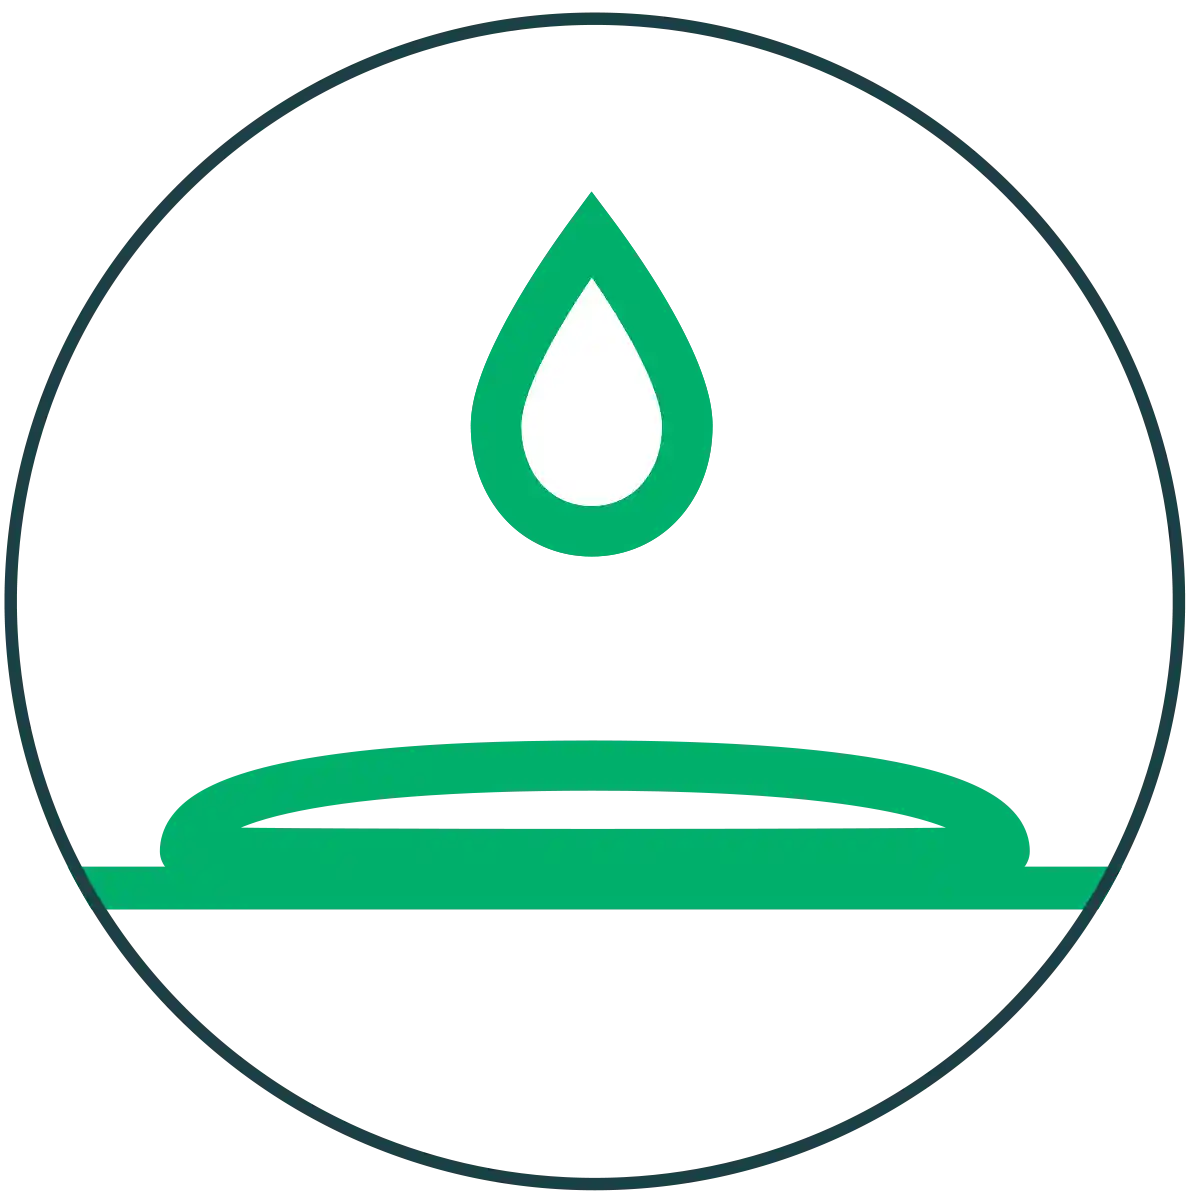 Wetting is an important part of Adjuvants and their use. This icon represents wetting.